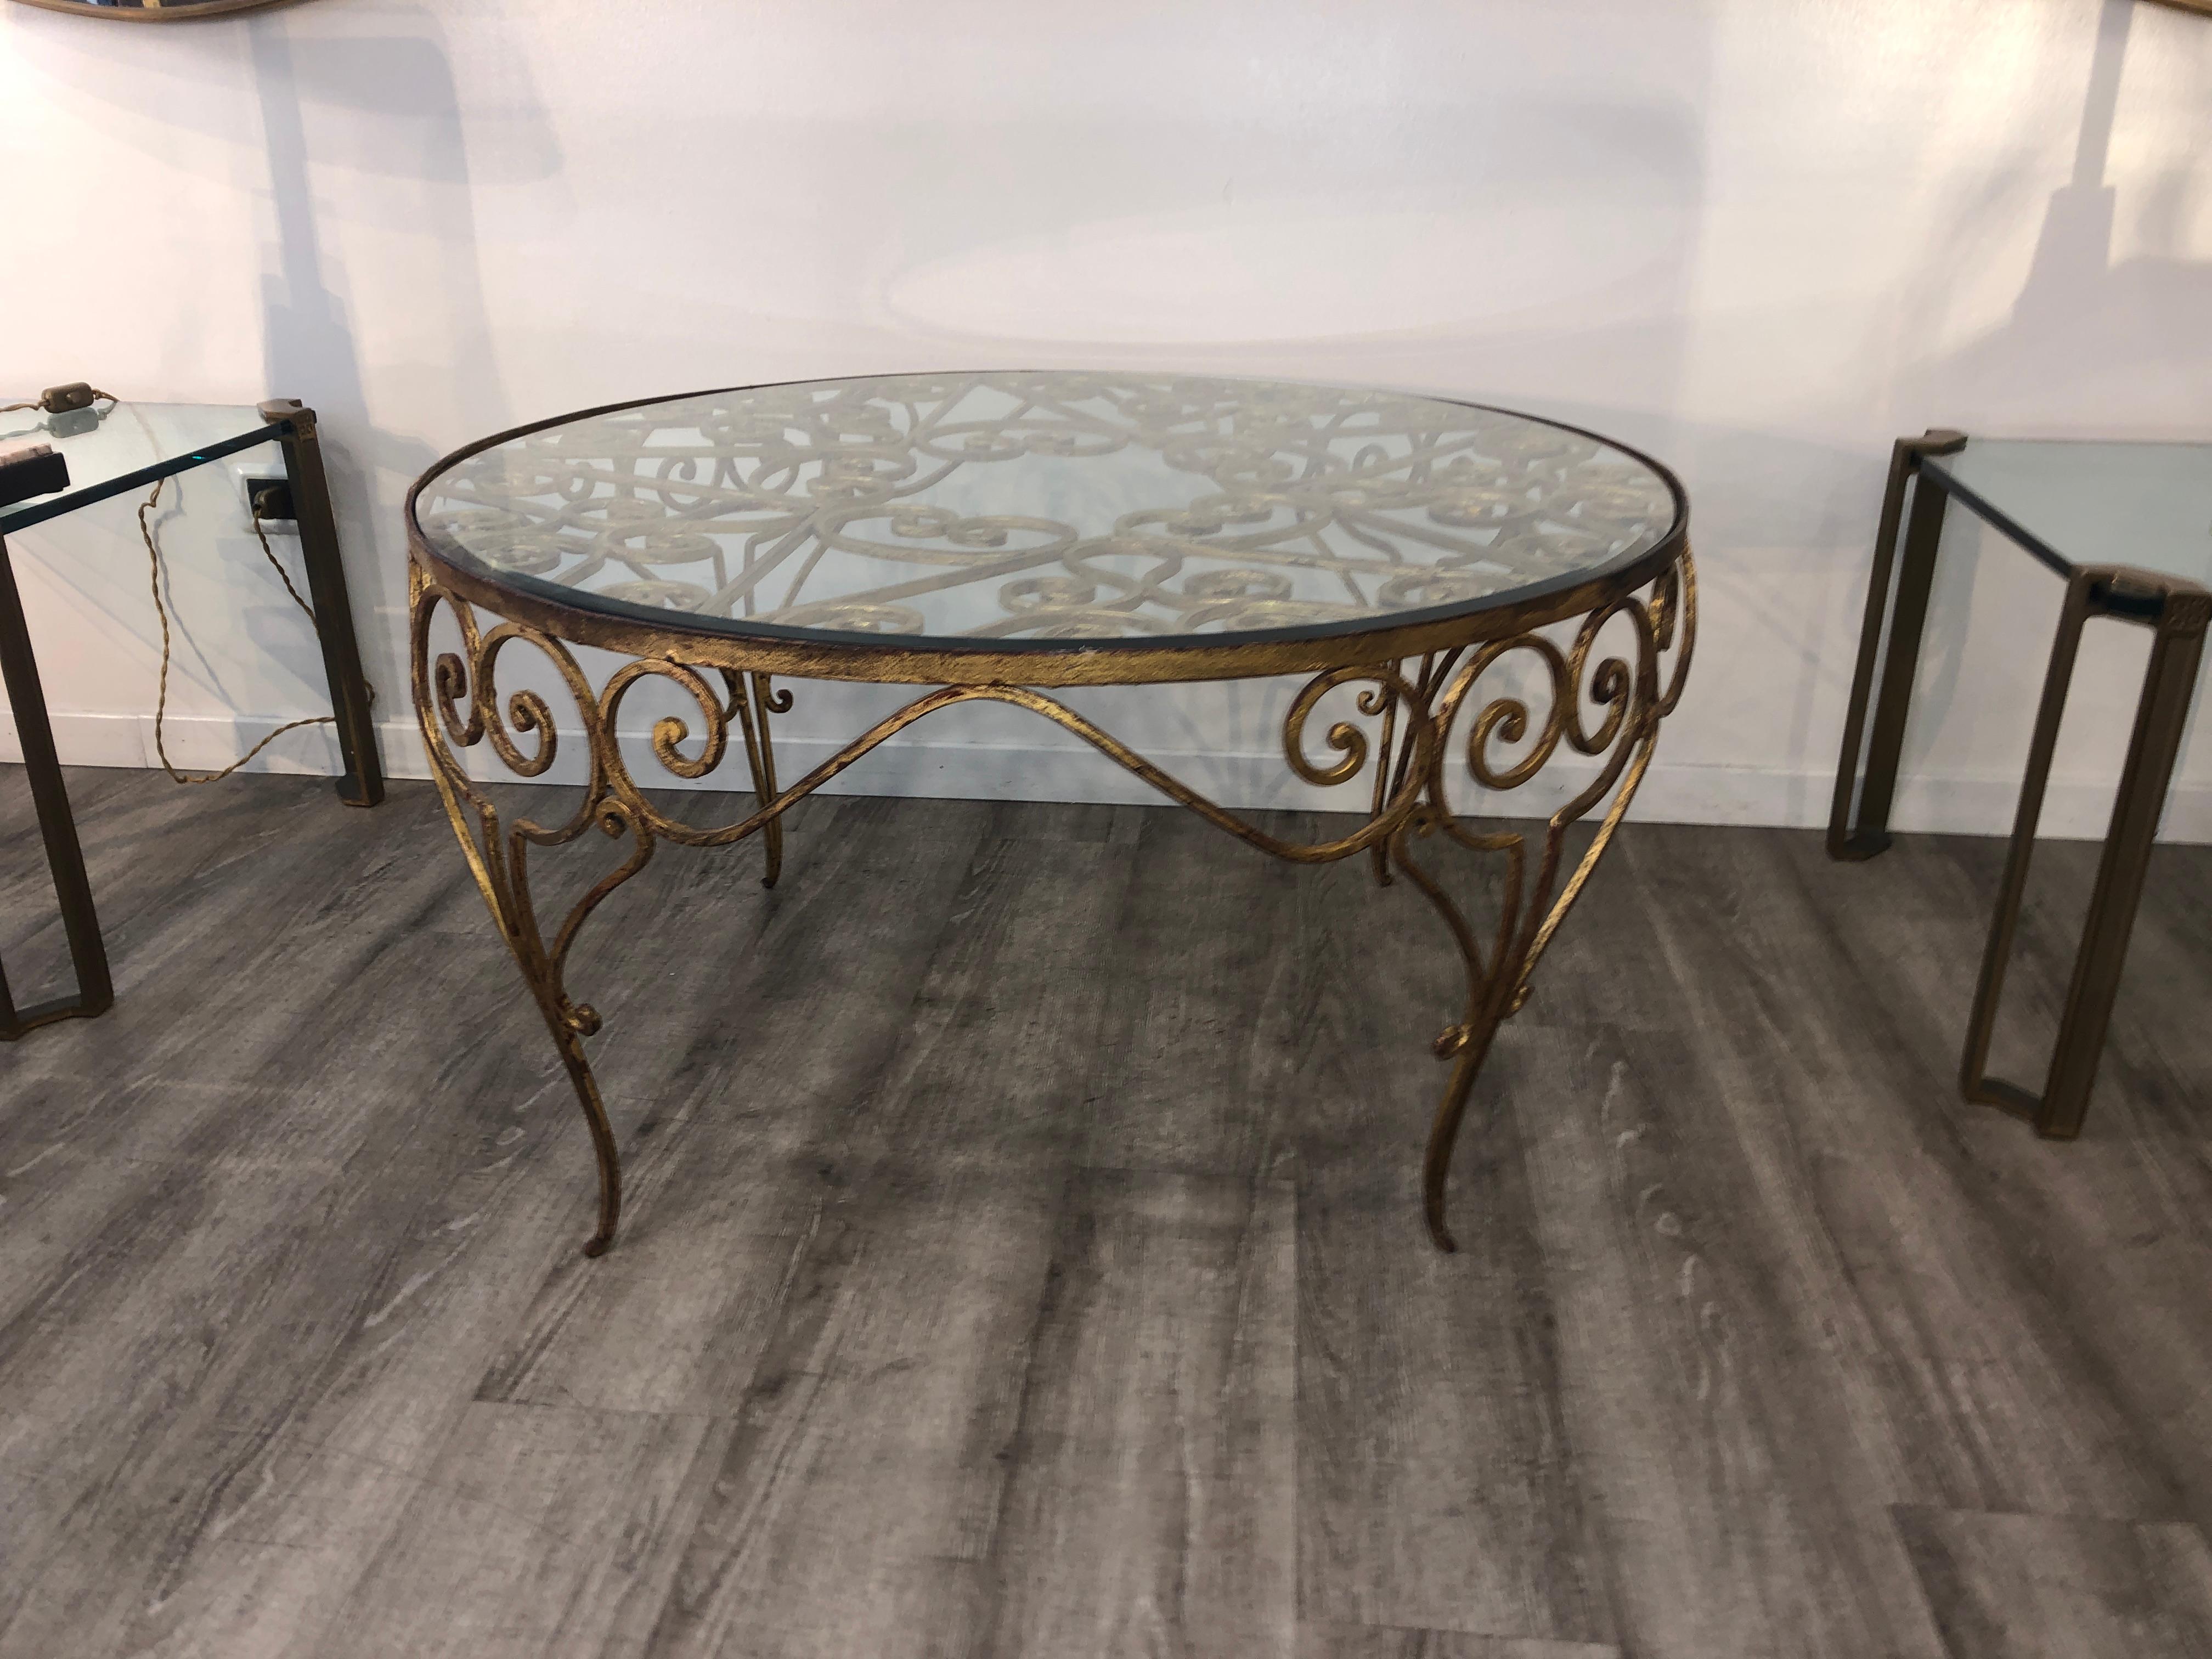 Italian 1950s decorative rounded golden wrought iron crystal top coffee table.
The crystal has a beveled edge and this is recently added.
No further restoration needed.

  